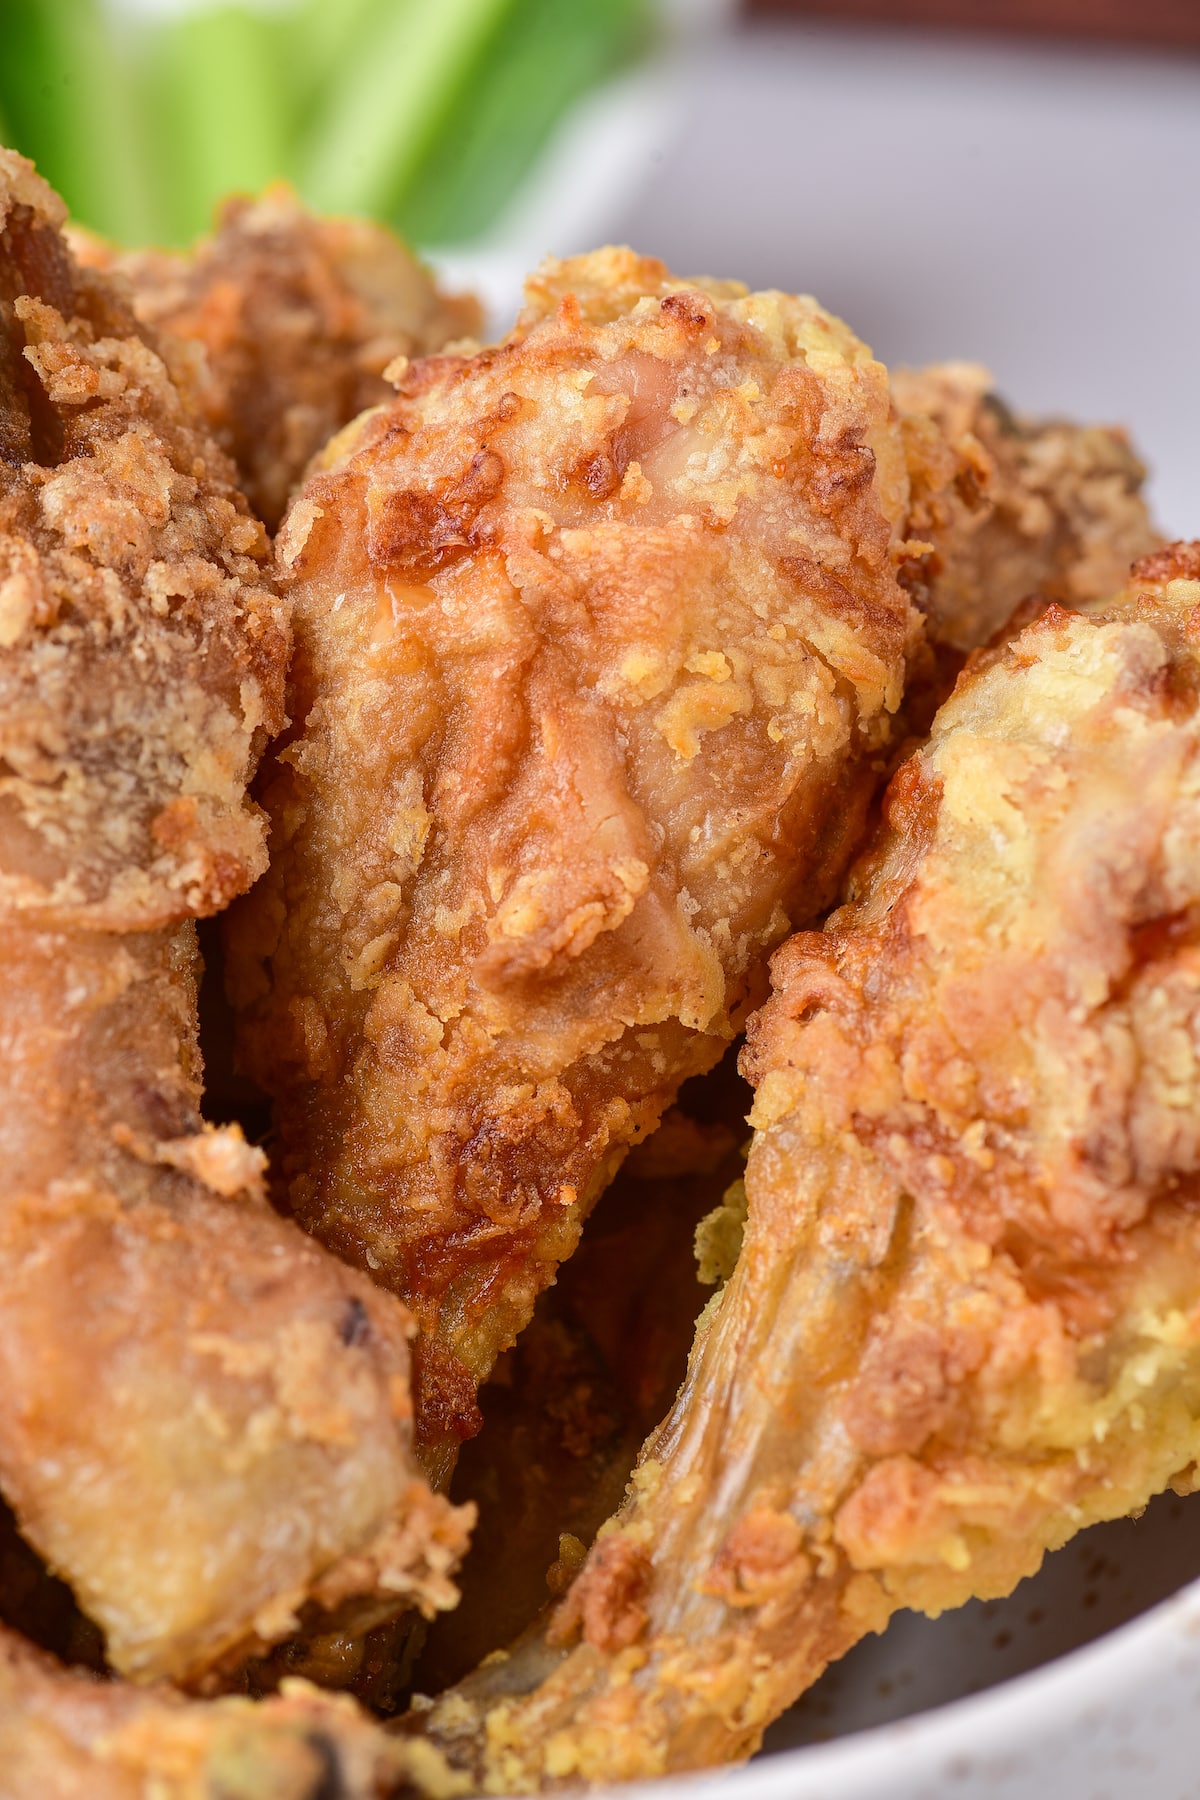 Indulge in the ultimate comfort food experience with a mouthwatering recipe for fried chicken legs! These fried chicken drumsticks are expertly seasoned, coated in a crispy batter, and deep-fried to golden perfection. The delightful combination of crunchy crust and juicy meat will leave you craving more. These fried chicken legs are guaranteed to be a hit with the whole family, and are an easy and affordable meal solution. Click through to get the awesome fried chicken legs recipe!! #chickenlegs